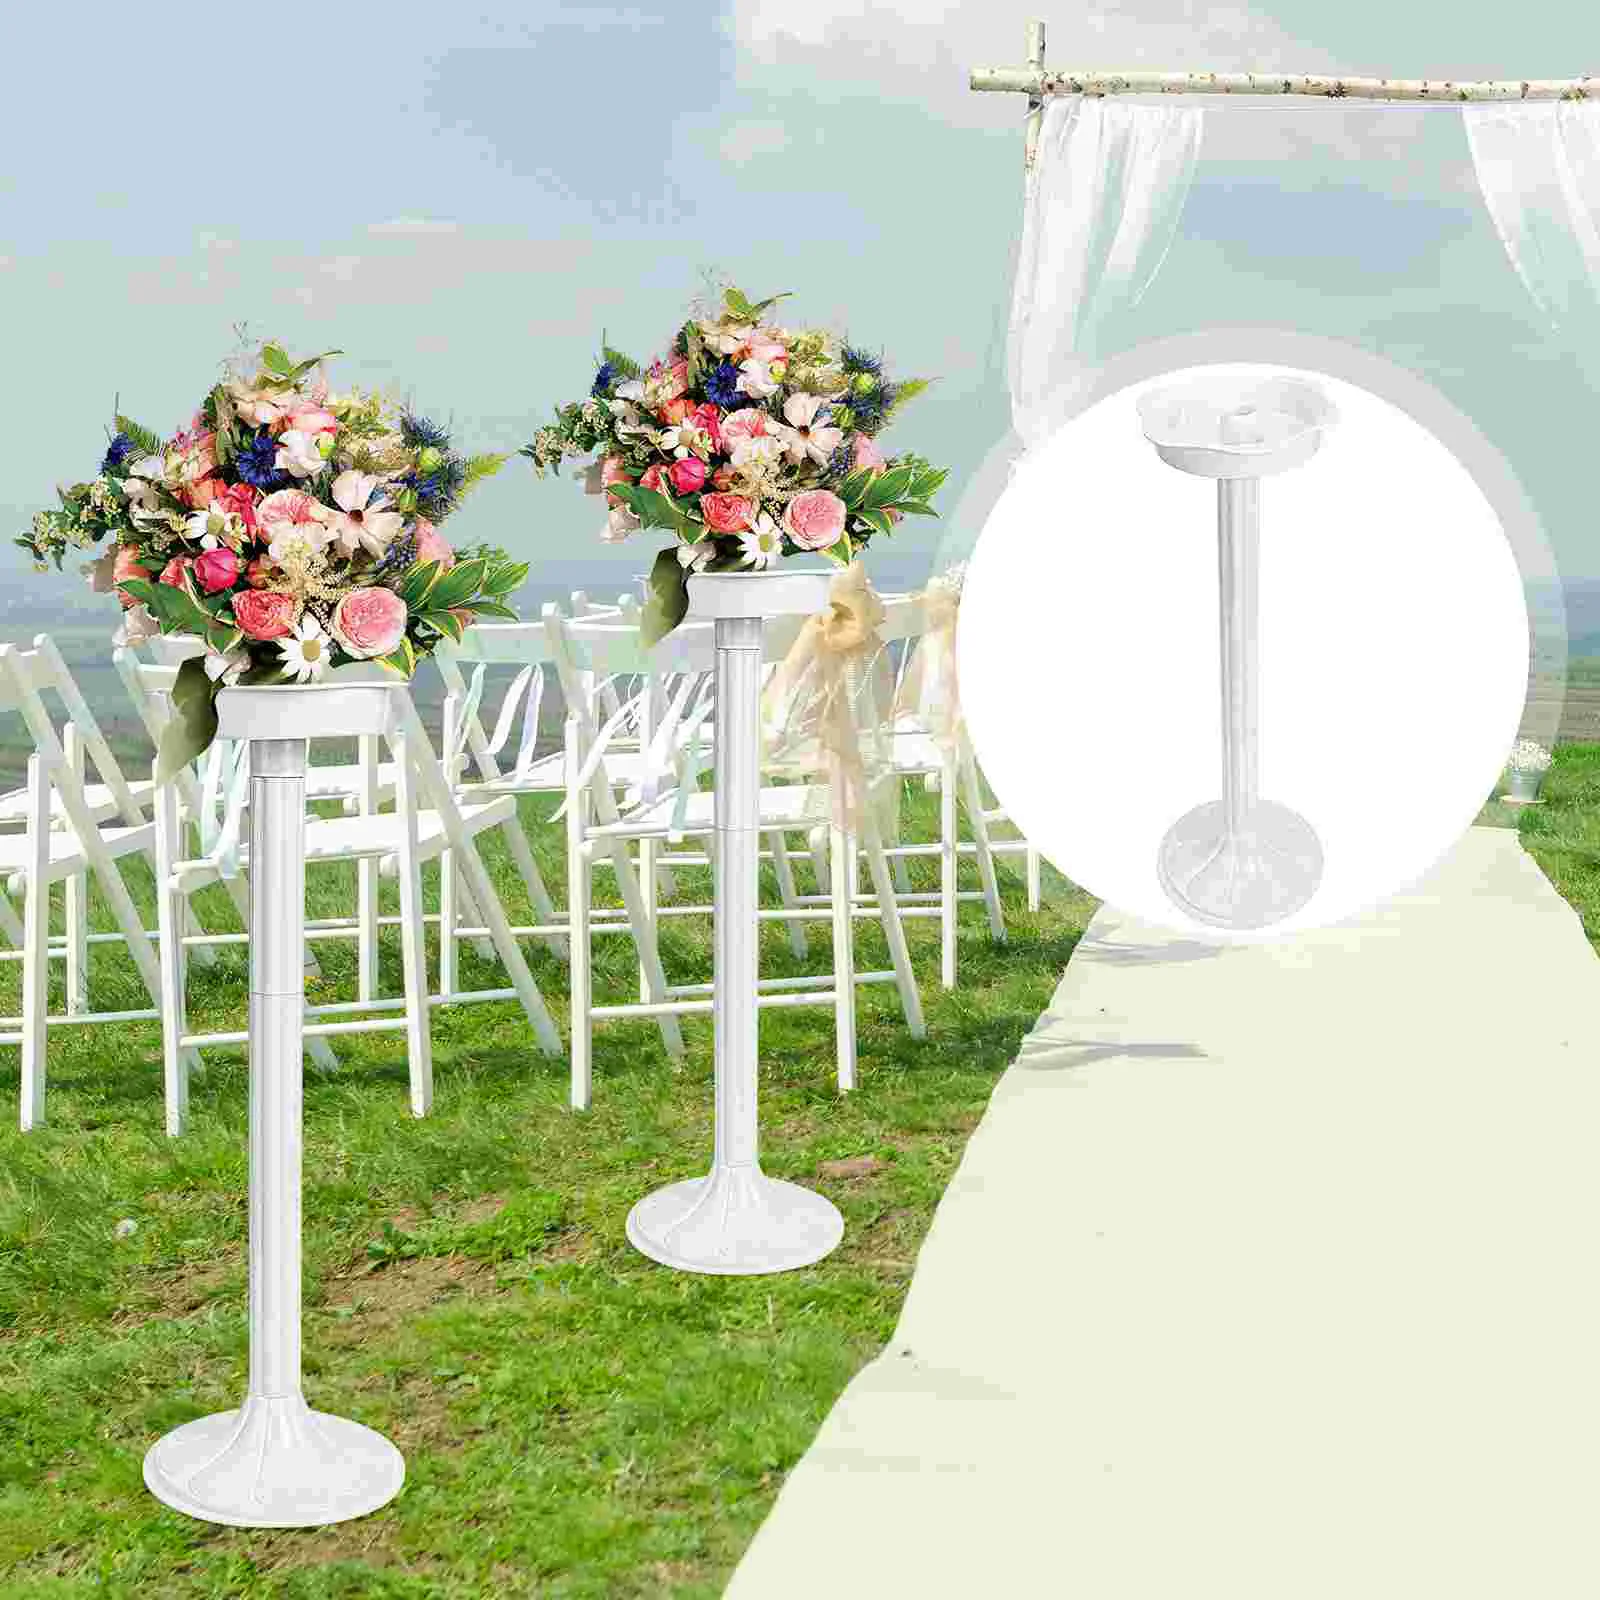 

2 Pcs Lu Yin Style Decorative Party Accessory Road Guiding Prop Wedding Supply Stand Outdoor Flowerpot Holder Flowers